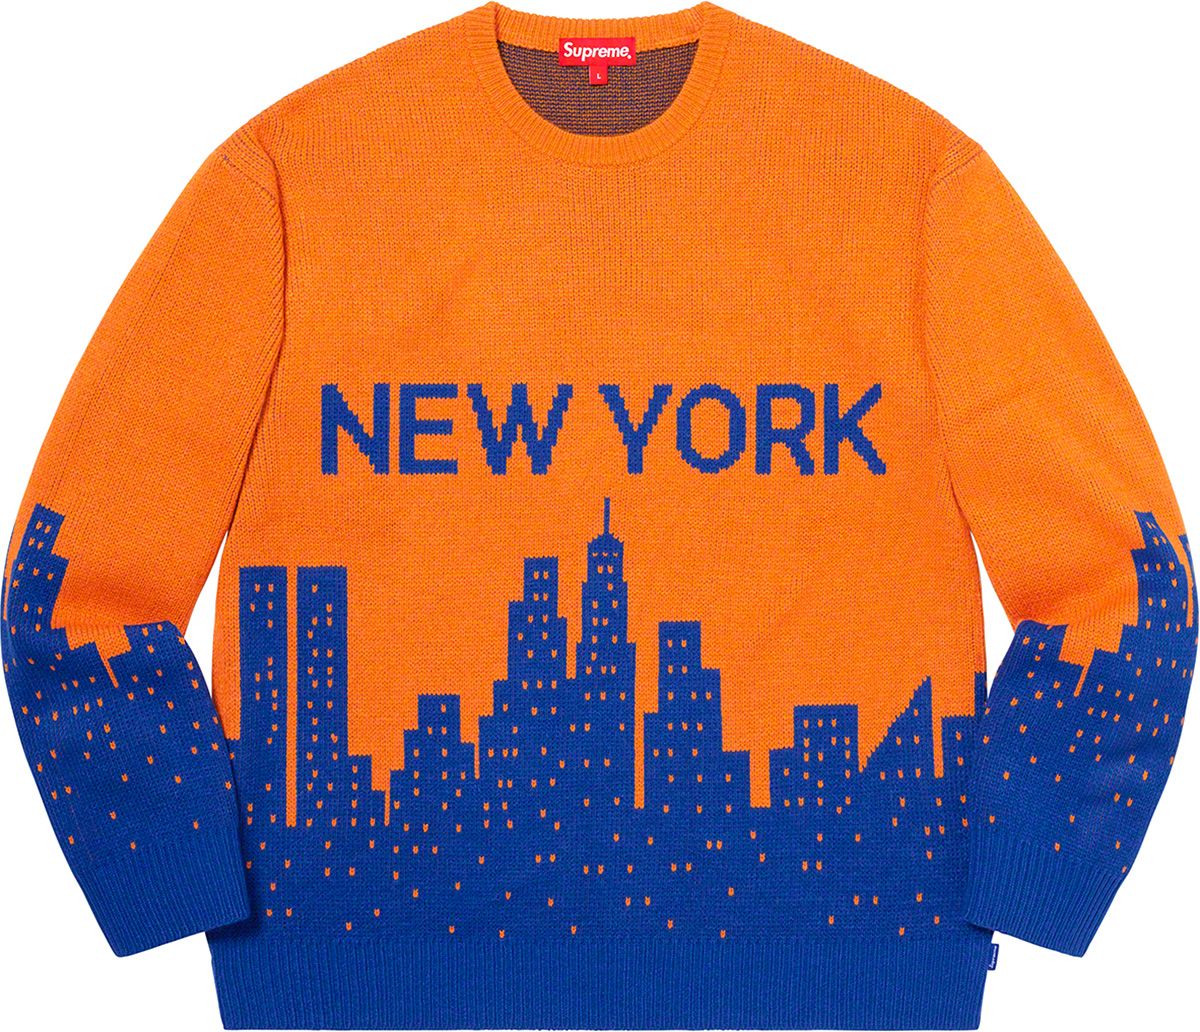 New York Sweater - Spring/Summer 2020 Preview – Supreme